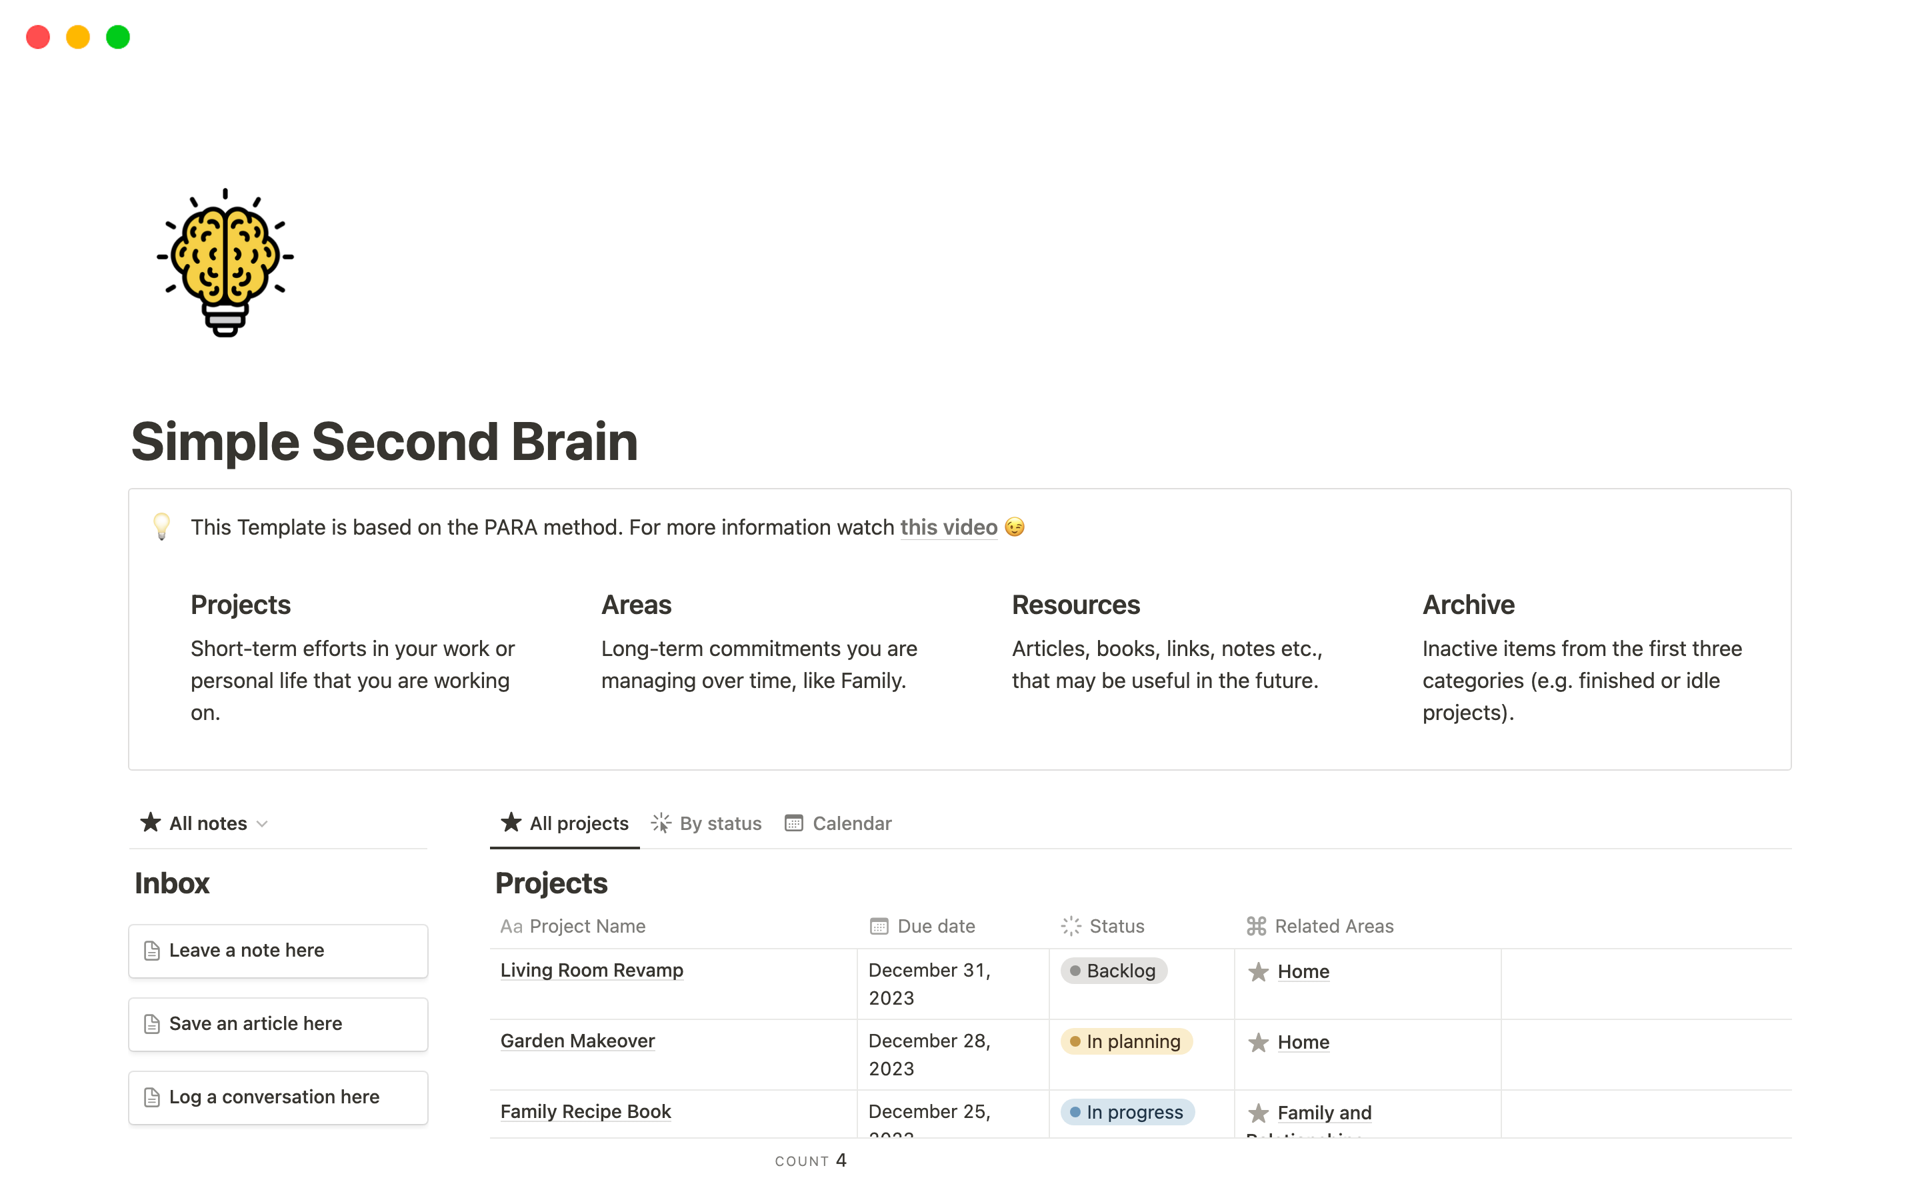 Get your life together and boost productivity with this Simple Second Brain Setup! It helps you organize notes, projects, and resources effortlessly using the PARA method.